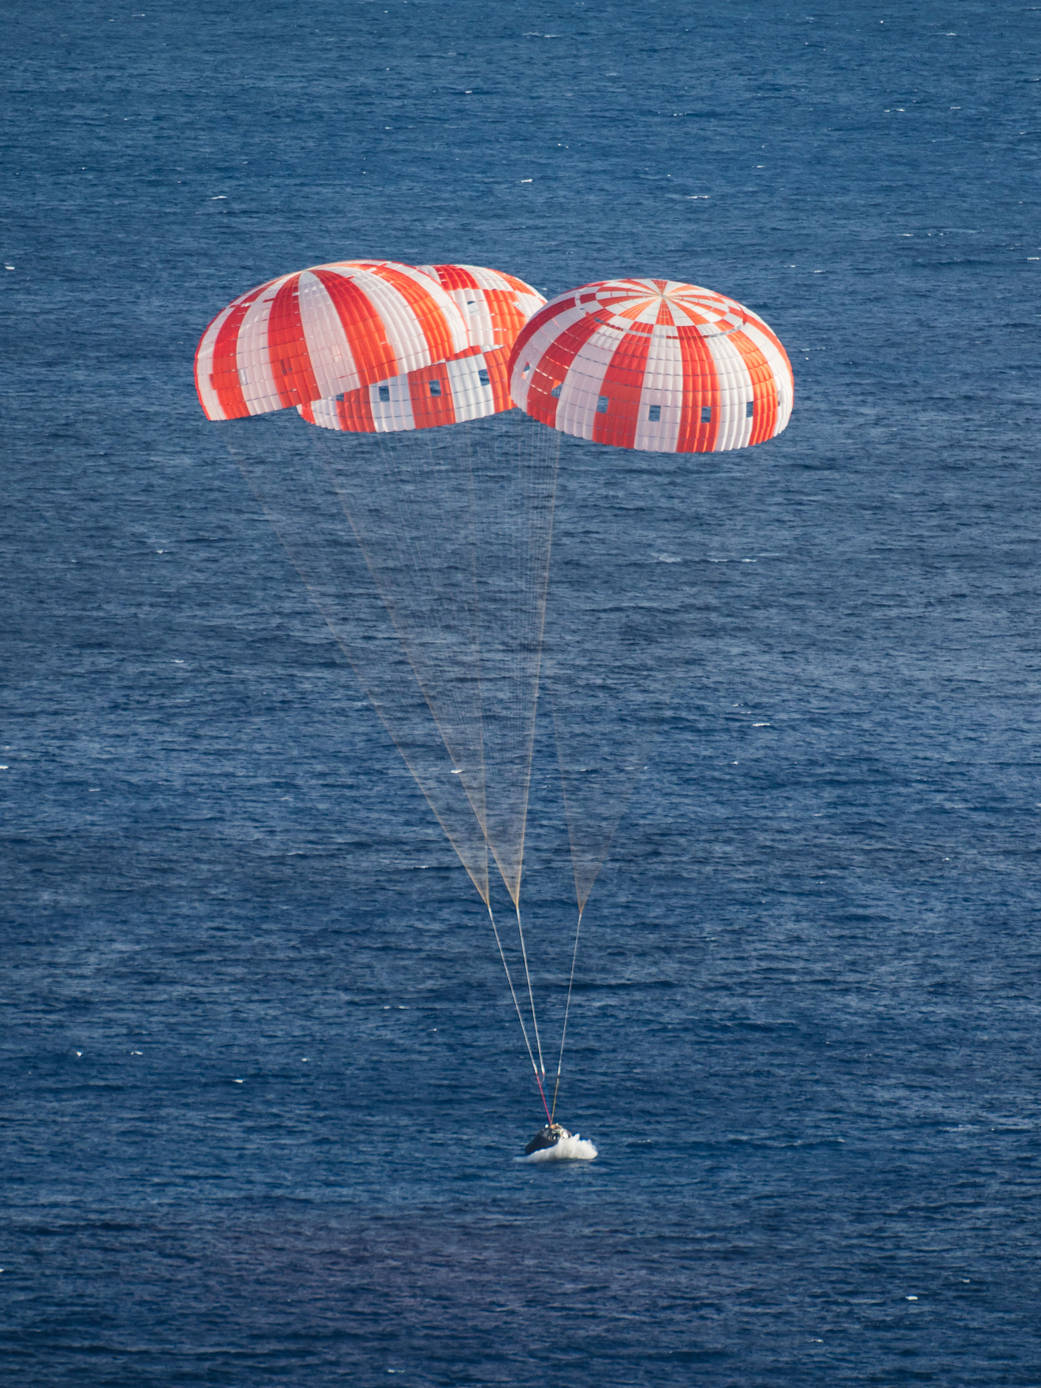 Orion Splashes Down in Pacific Ocean